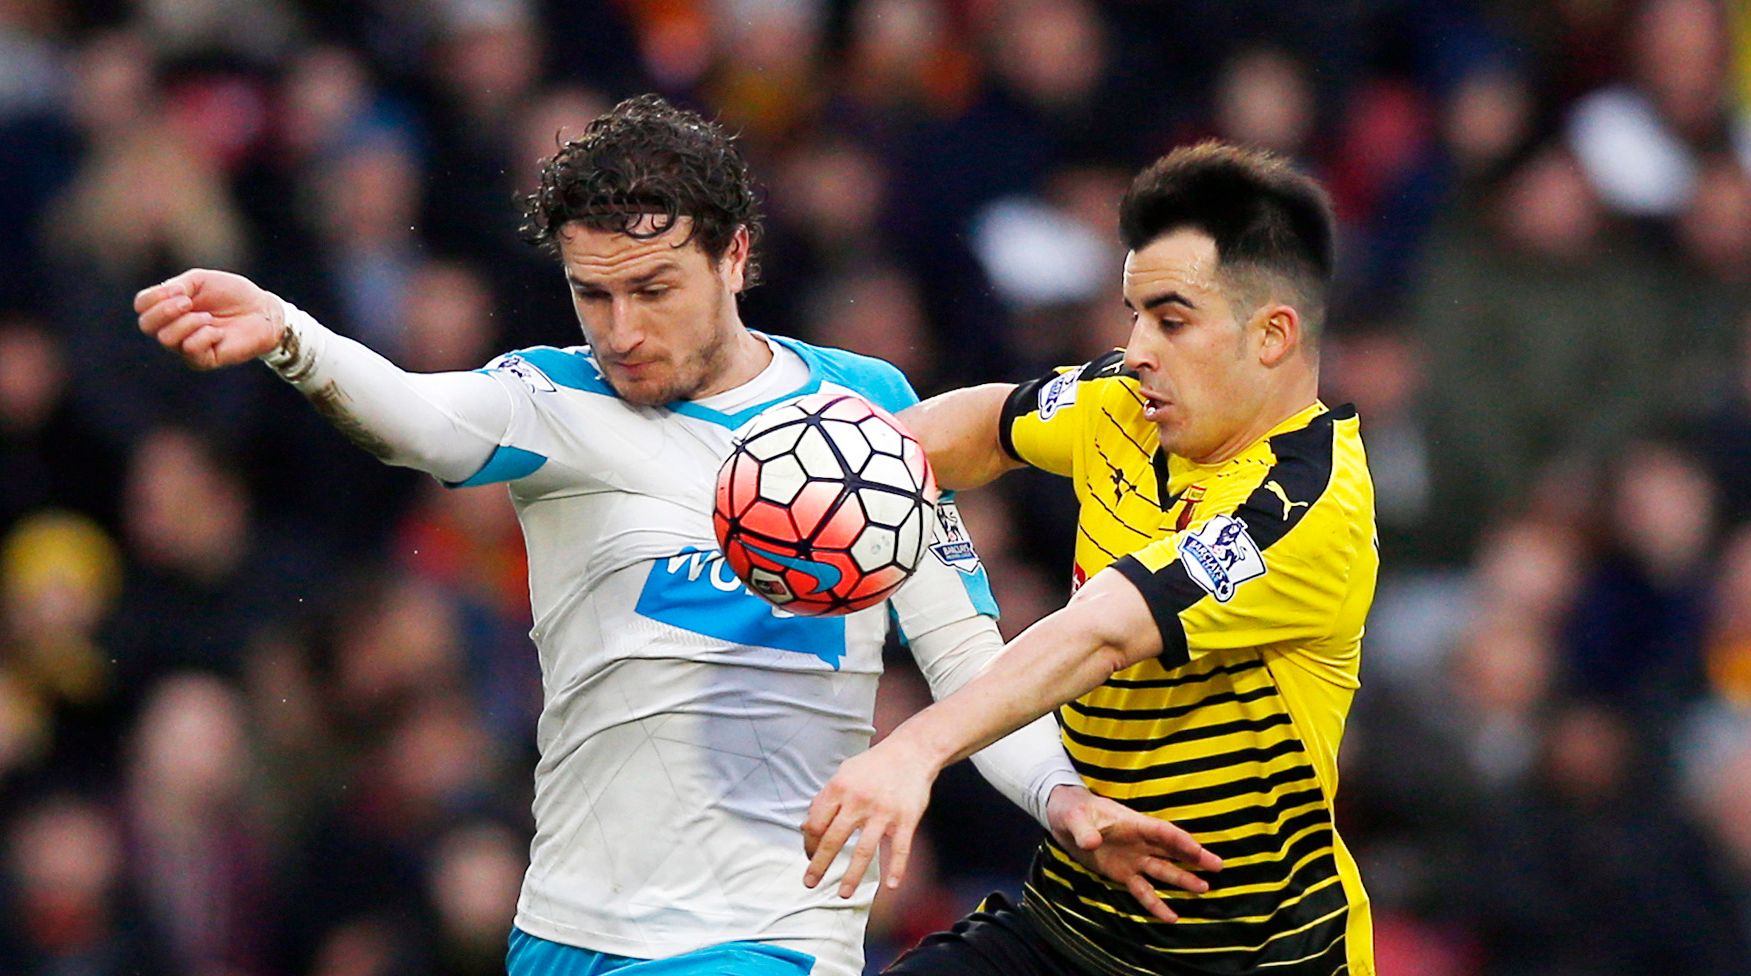 Football - Watford v Newcastle United - FA Cup Third Round - Vicarage Road - 9/1/16
Newcastle's Daryl Janmaat in action with Watford's Jose Jurado
Mandatory Credit: Action Images / Peter Cziborra
Livepic
EDITORIAL USE ONLY. No use with unauthorized audio, video, data, fixture lists, club/league logos or 